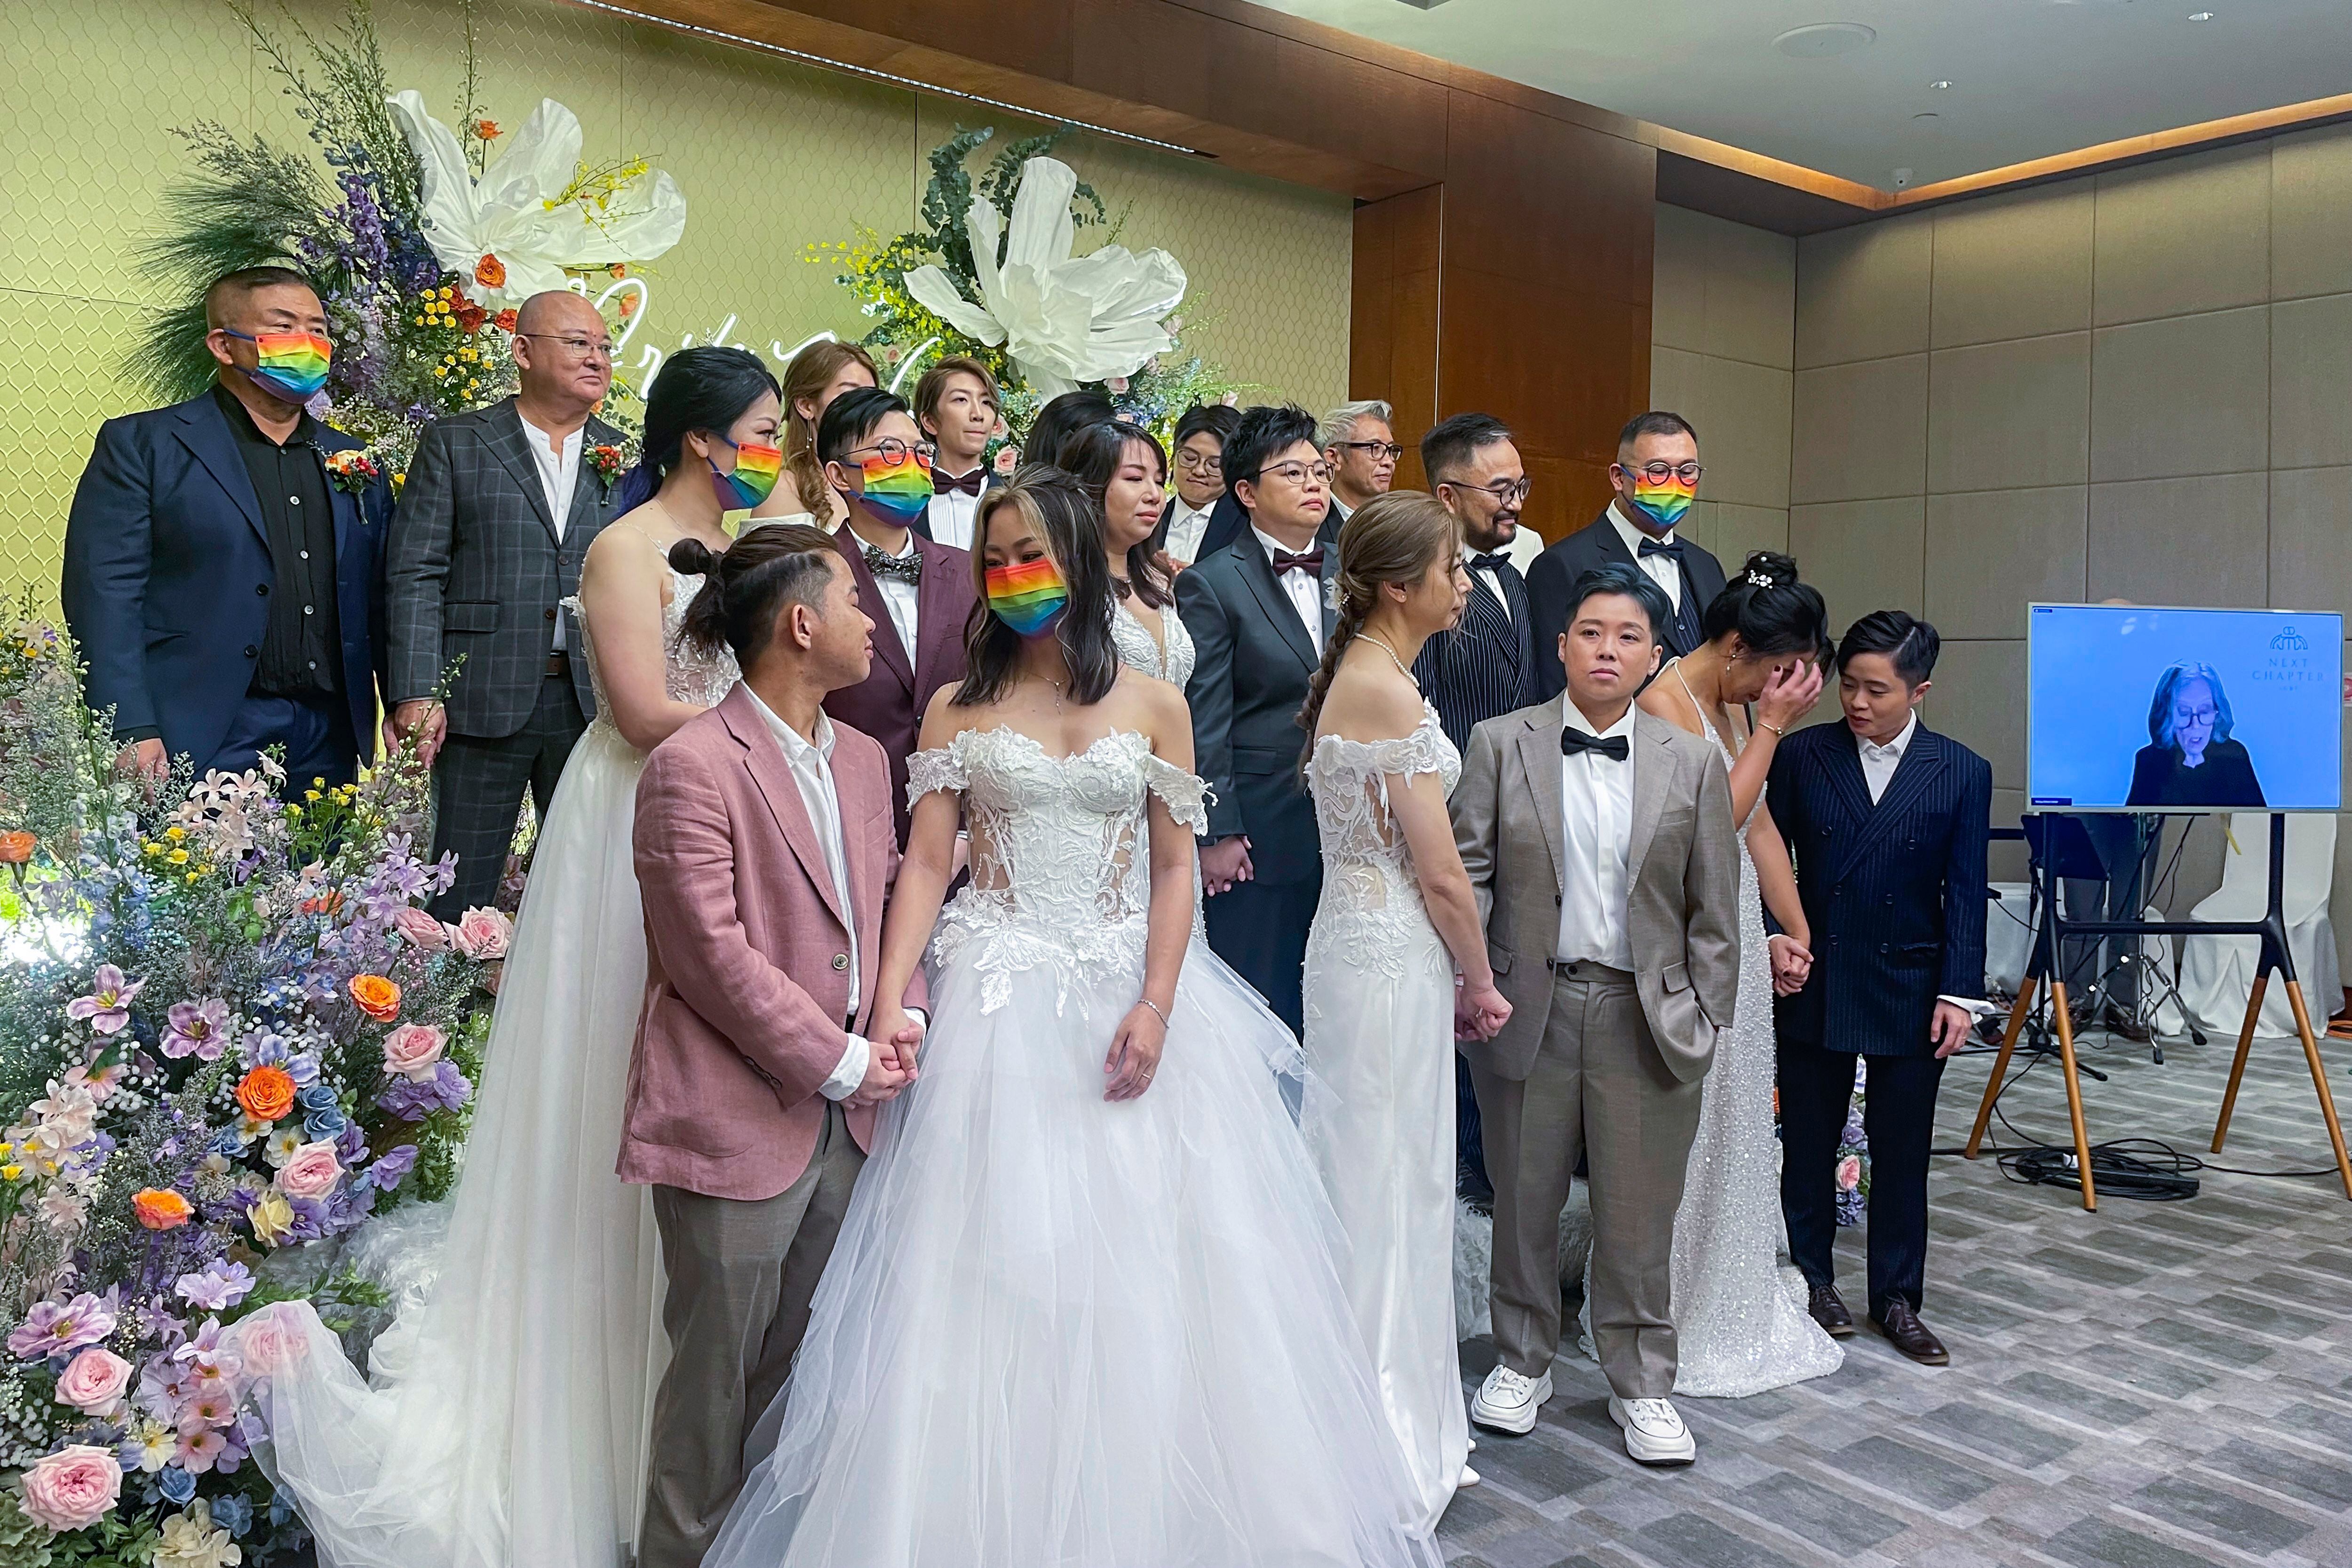 A US officiant marries 10 same-sex couples in Hong Kong via video chat thumbnail